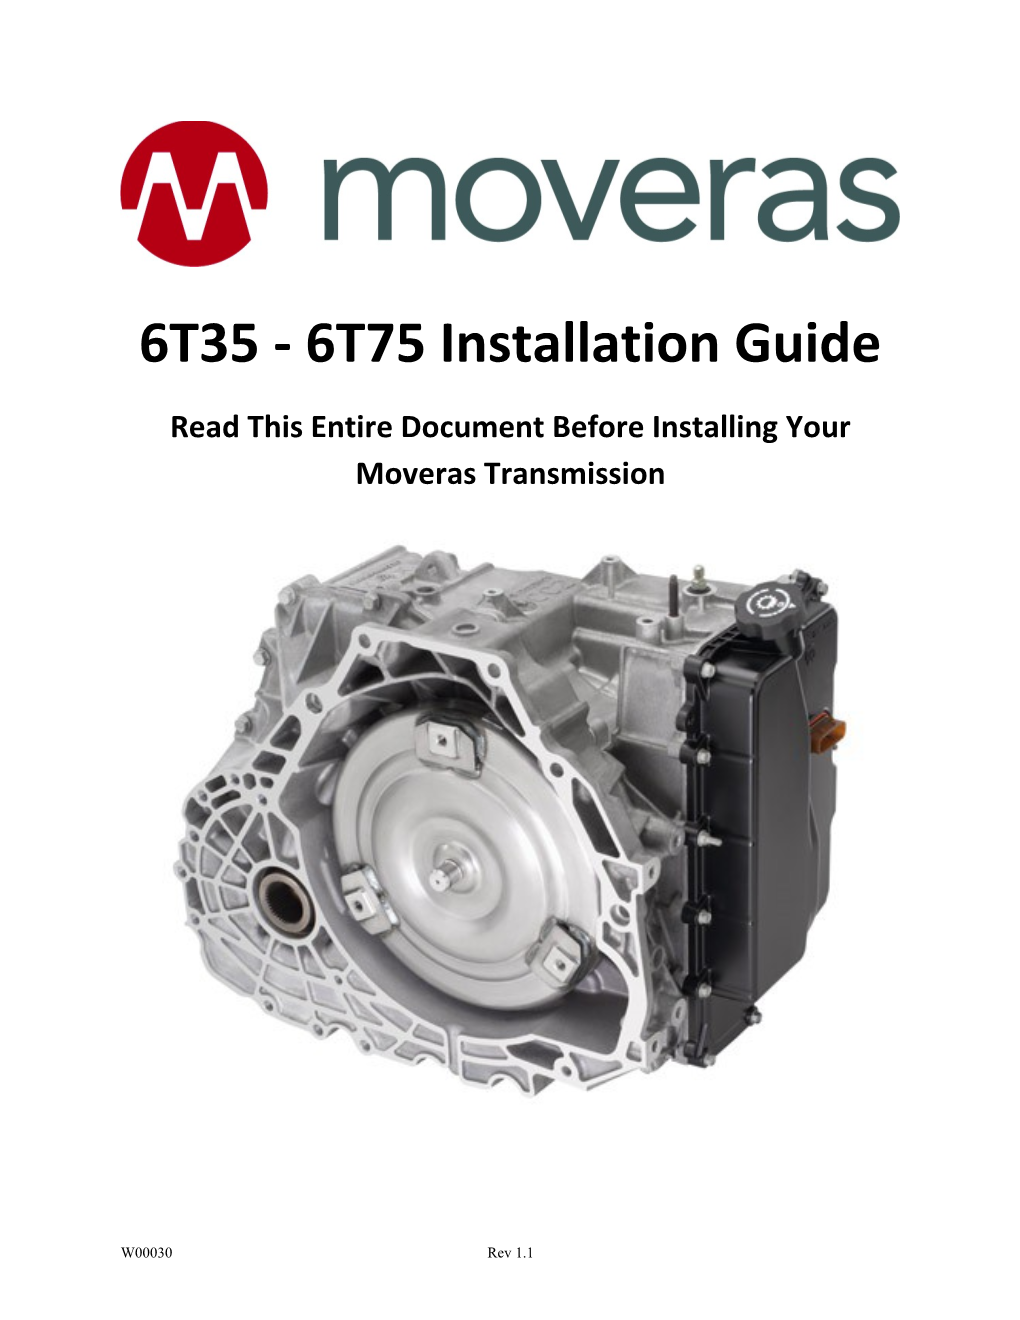 Read This Entire Document Before Installing Your Moveras Transmission